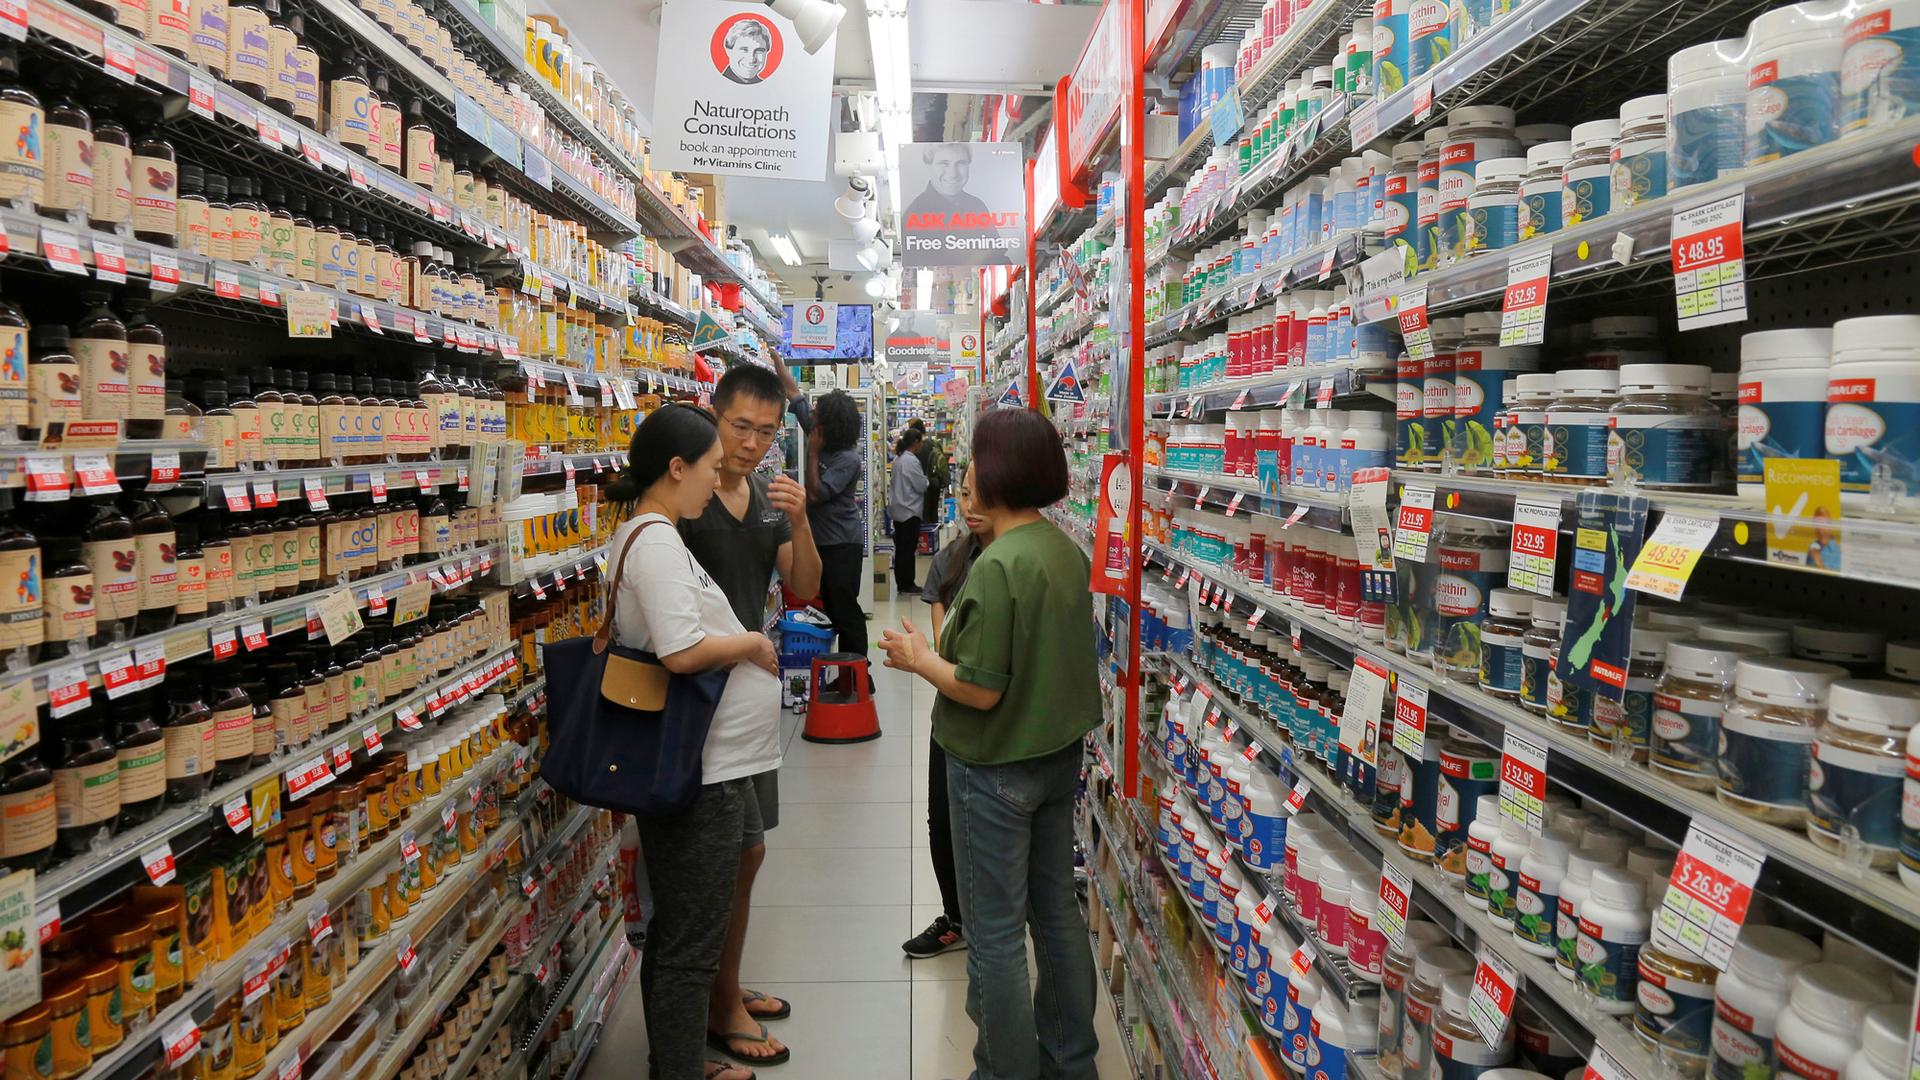 Shoppers are in an aisle of a health store looking at a wide variety of supplements.